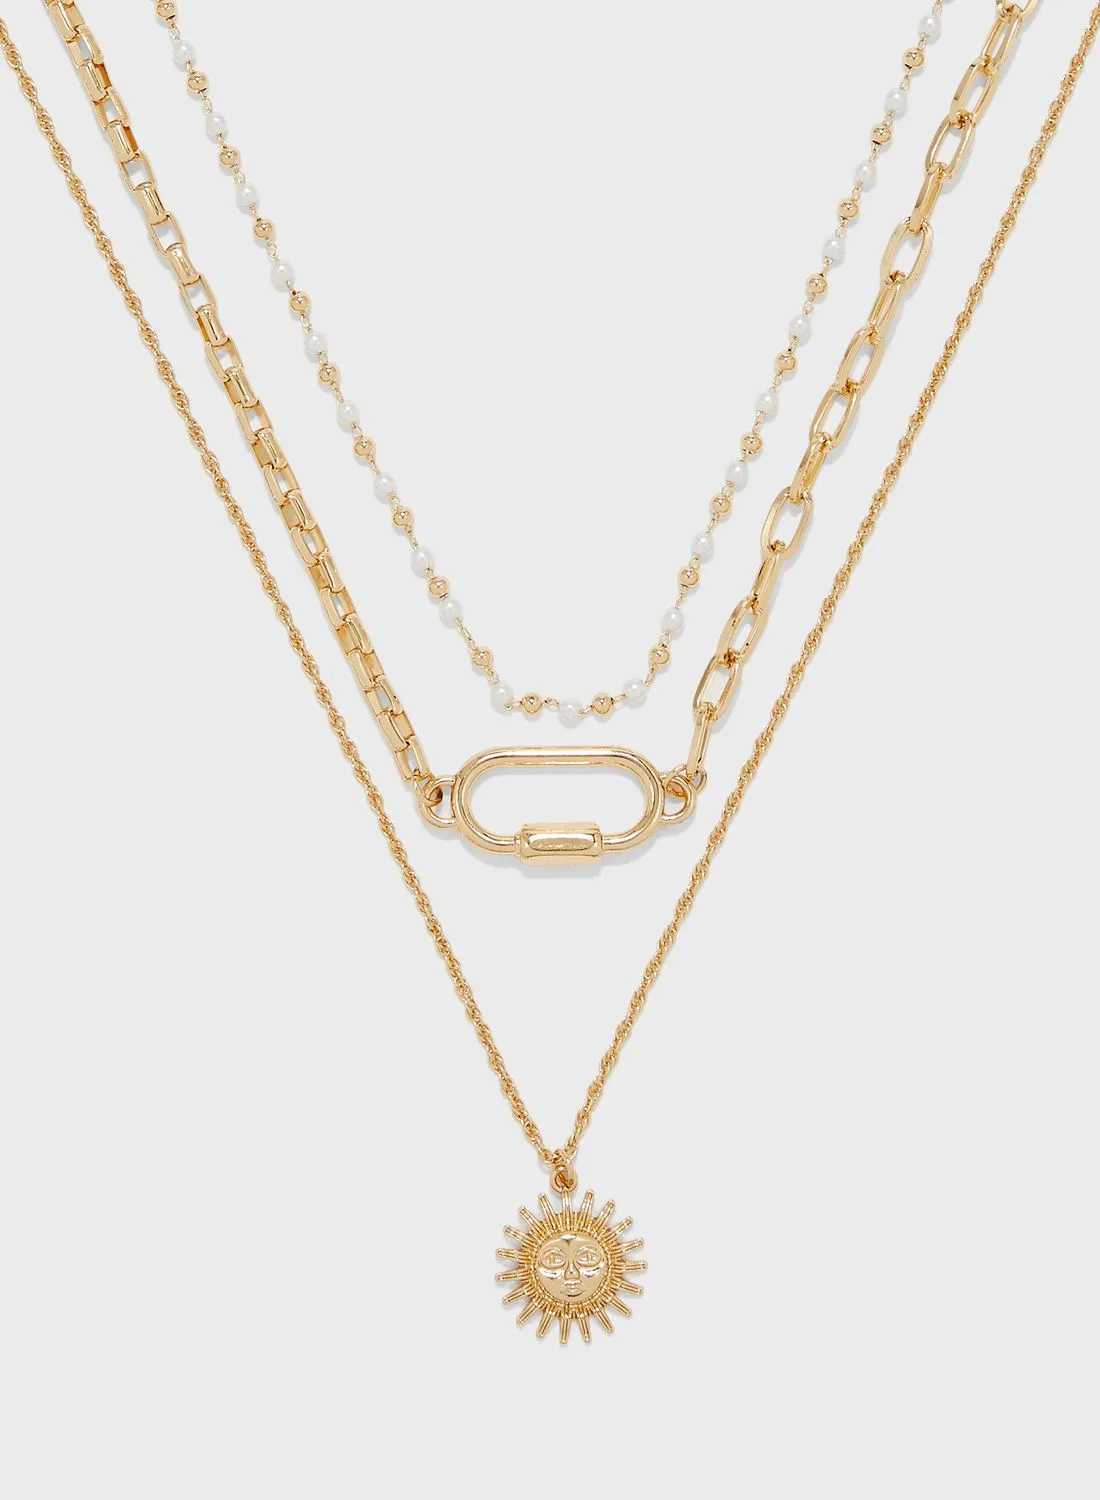 Ginger Triple Layered Chain Necklace With Sunburst Pendent